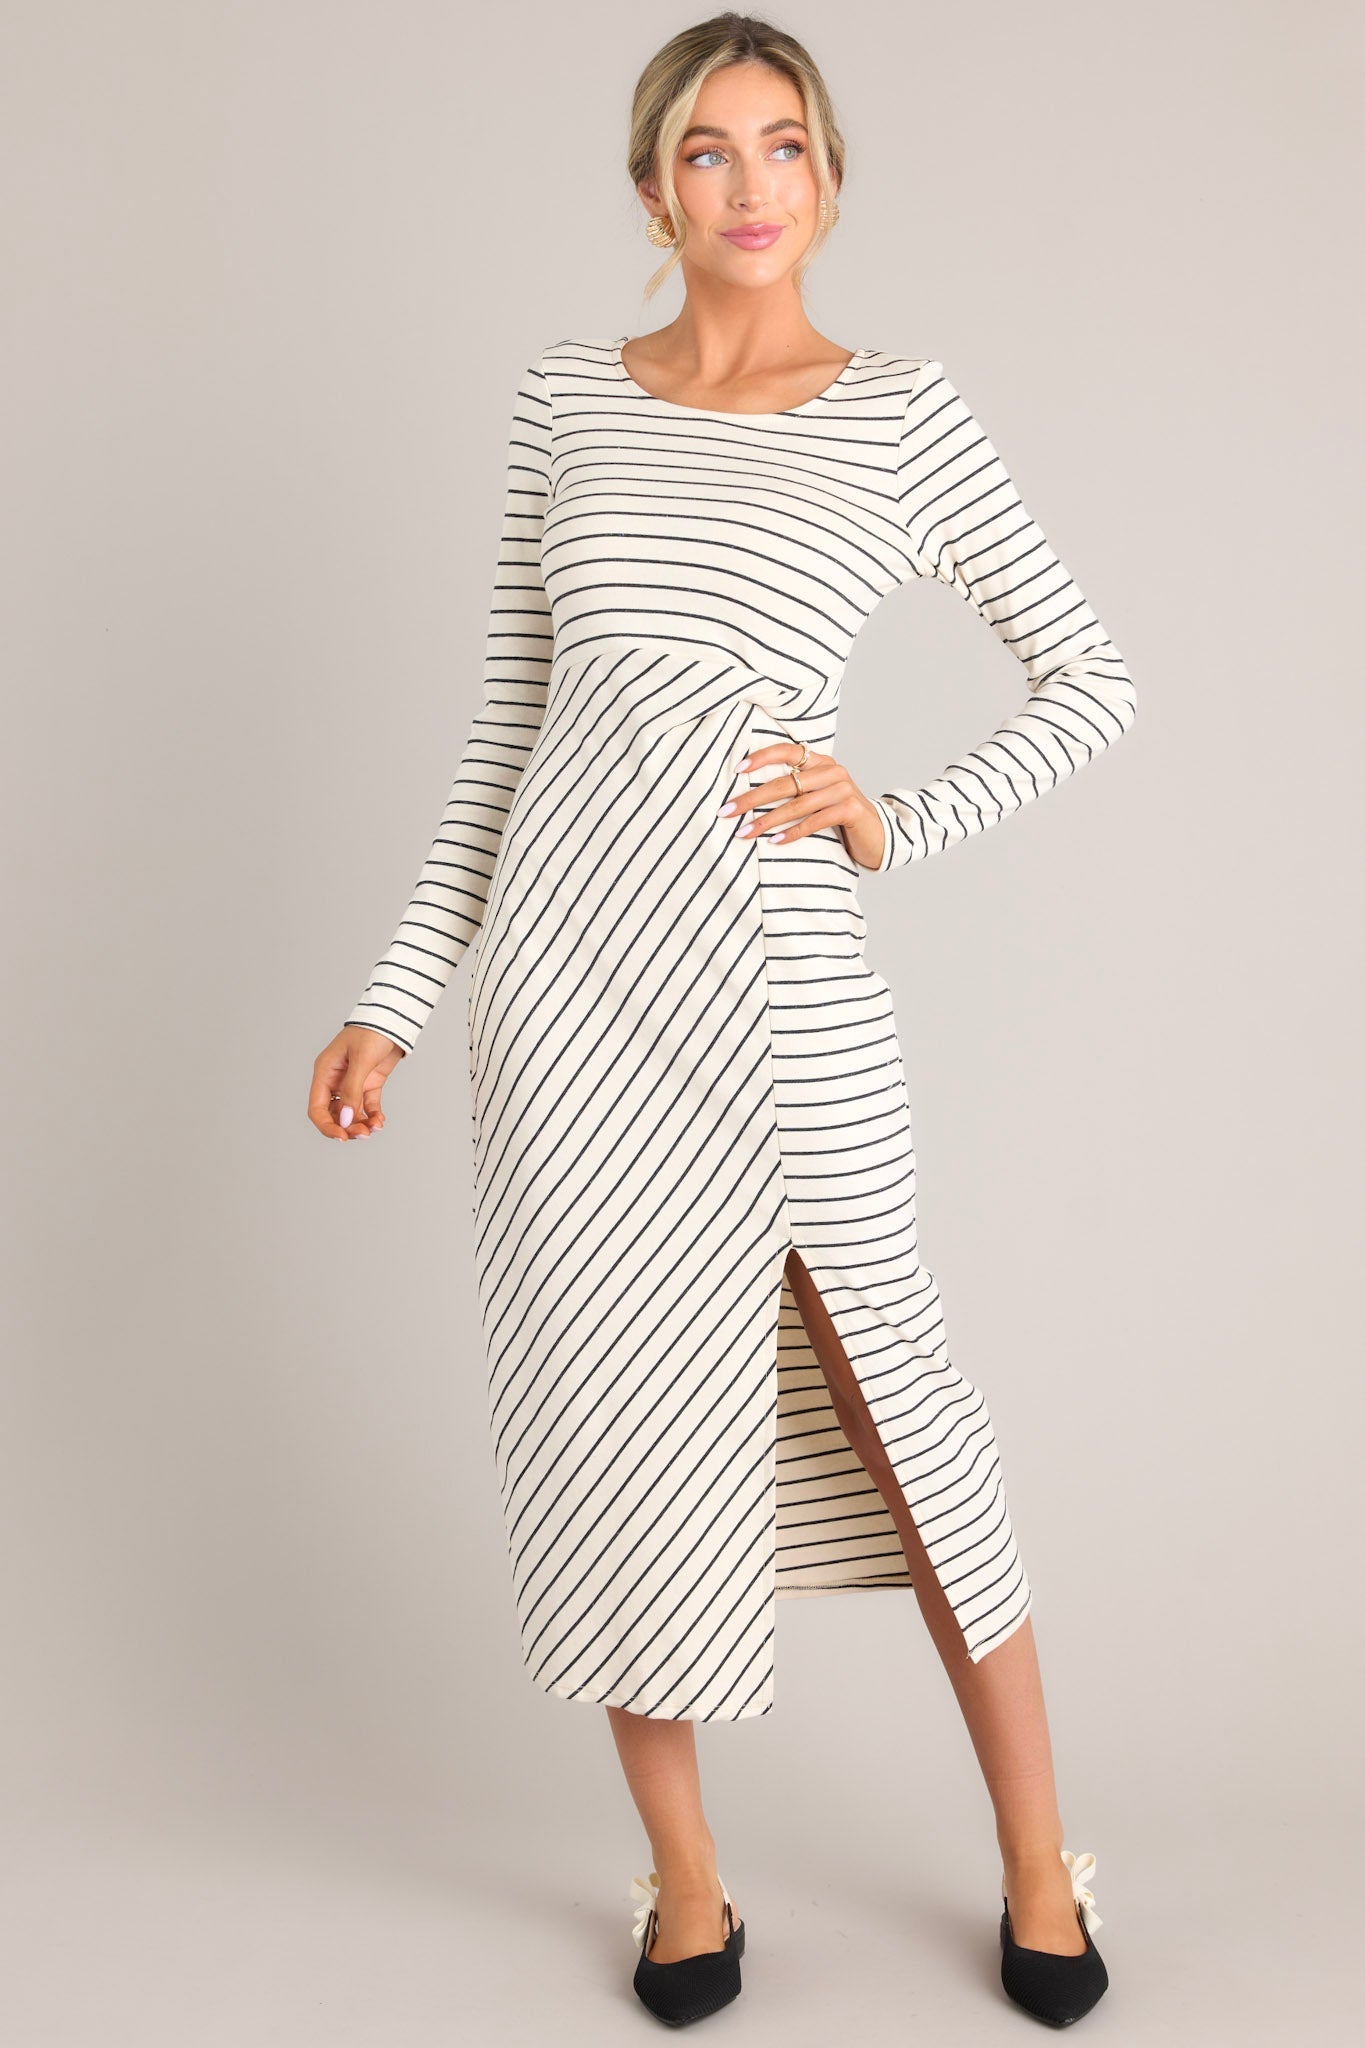 This ivory stripe dress features a crew neckline, a fitted waistline with a twist detail on the side, a side slit up the leg, long sleeves, and a striped pattern throughout.